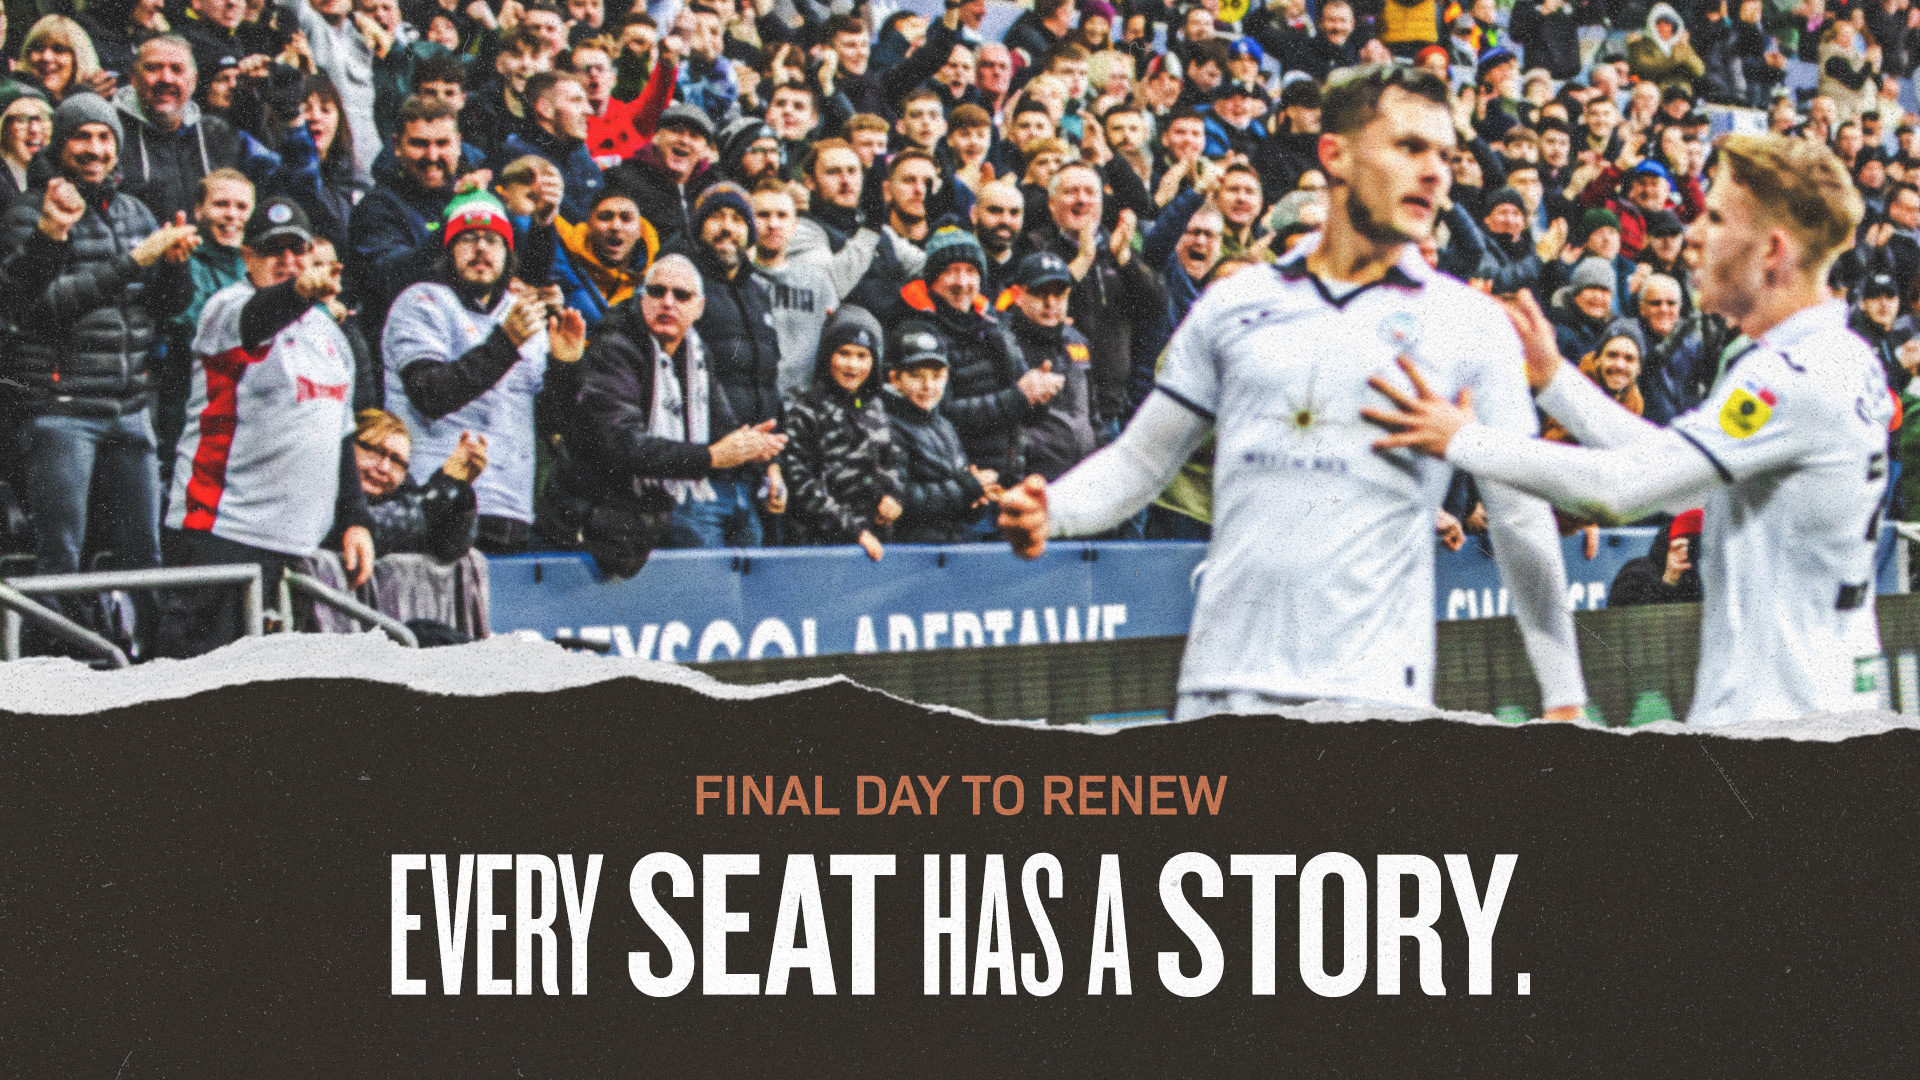 Liam Cullen and Ollie Cooper celebrating a goal in front of crowds at the Swansea.com Stadium. Final day to renew season ticket graphic.